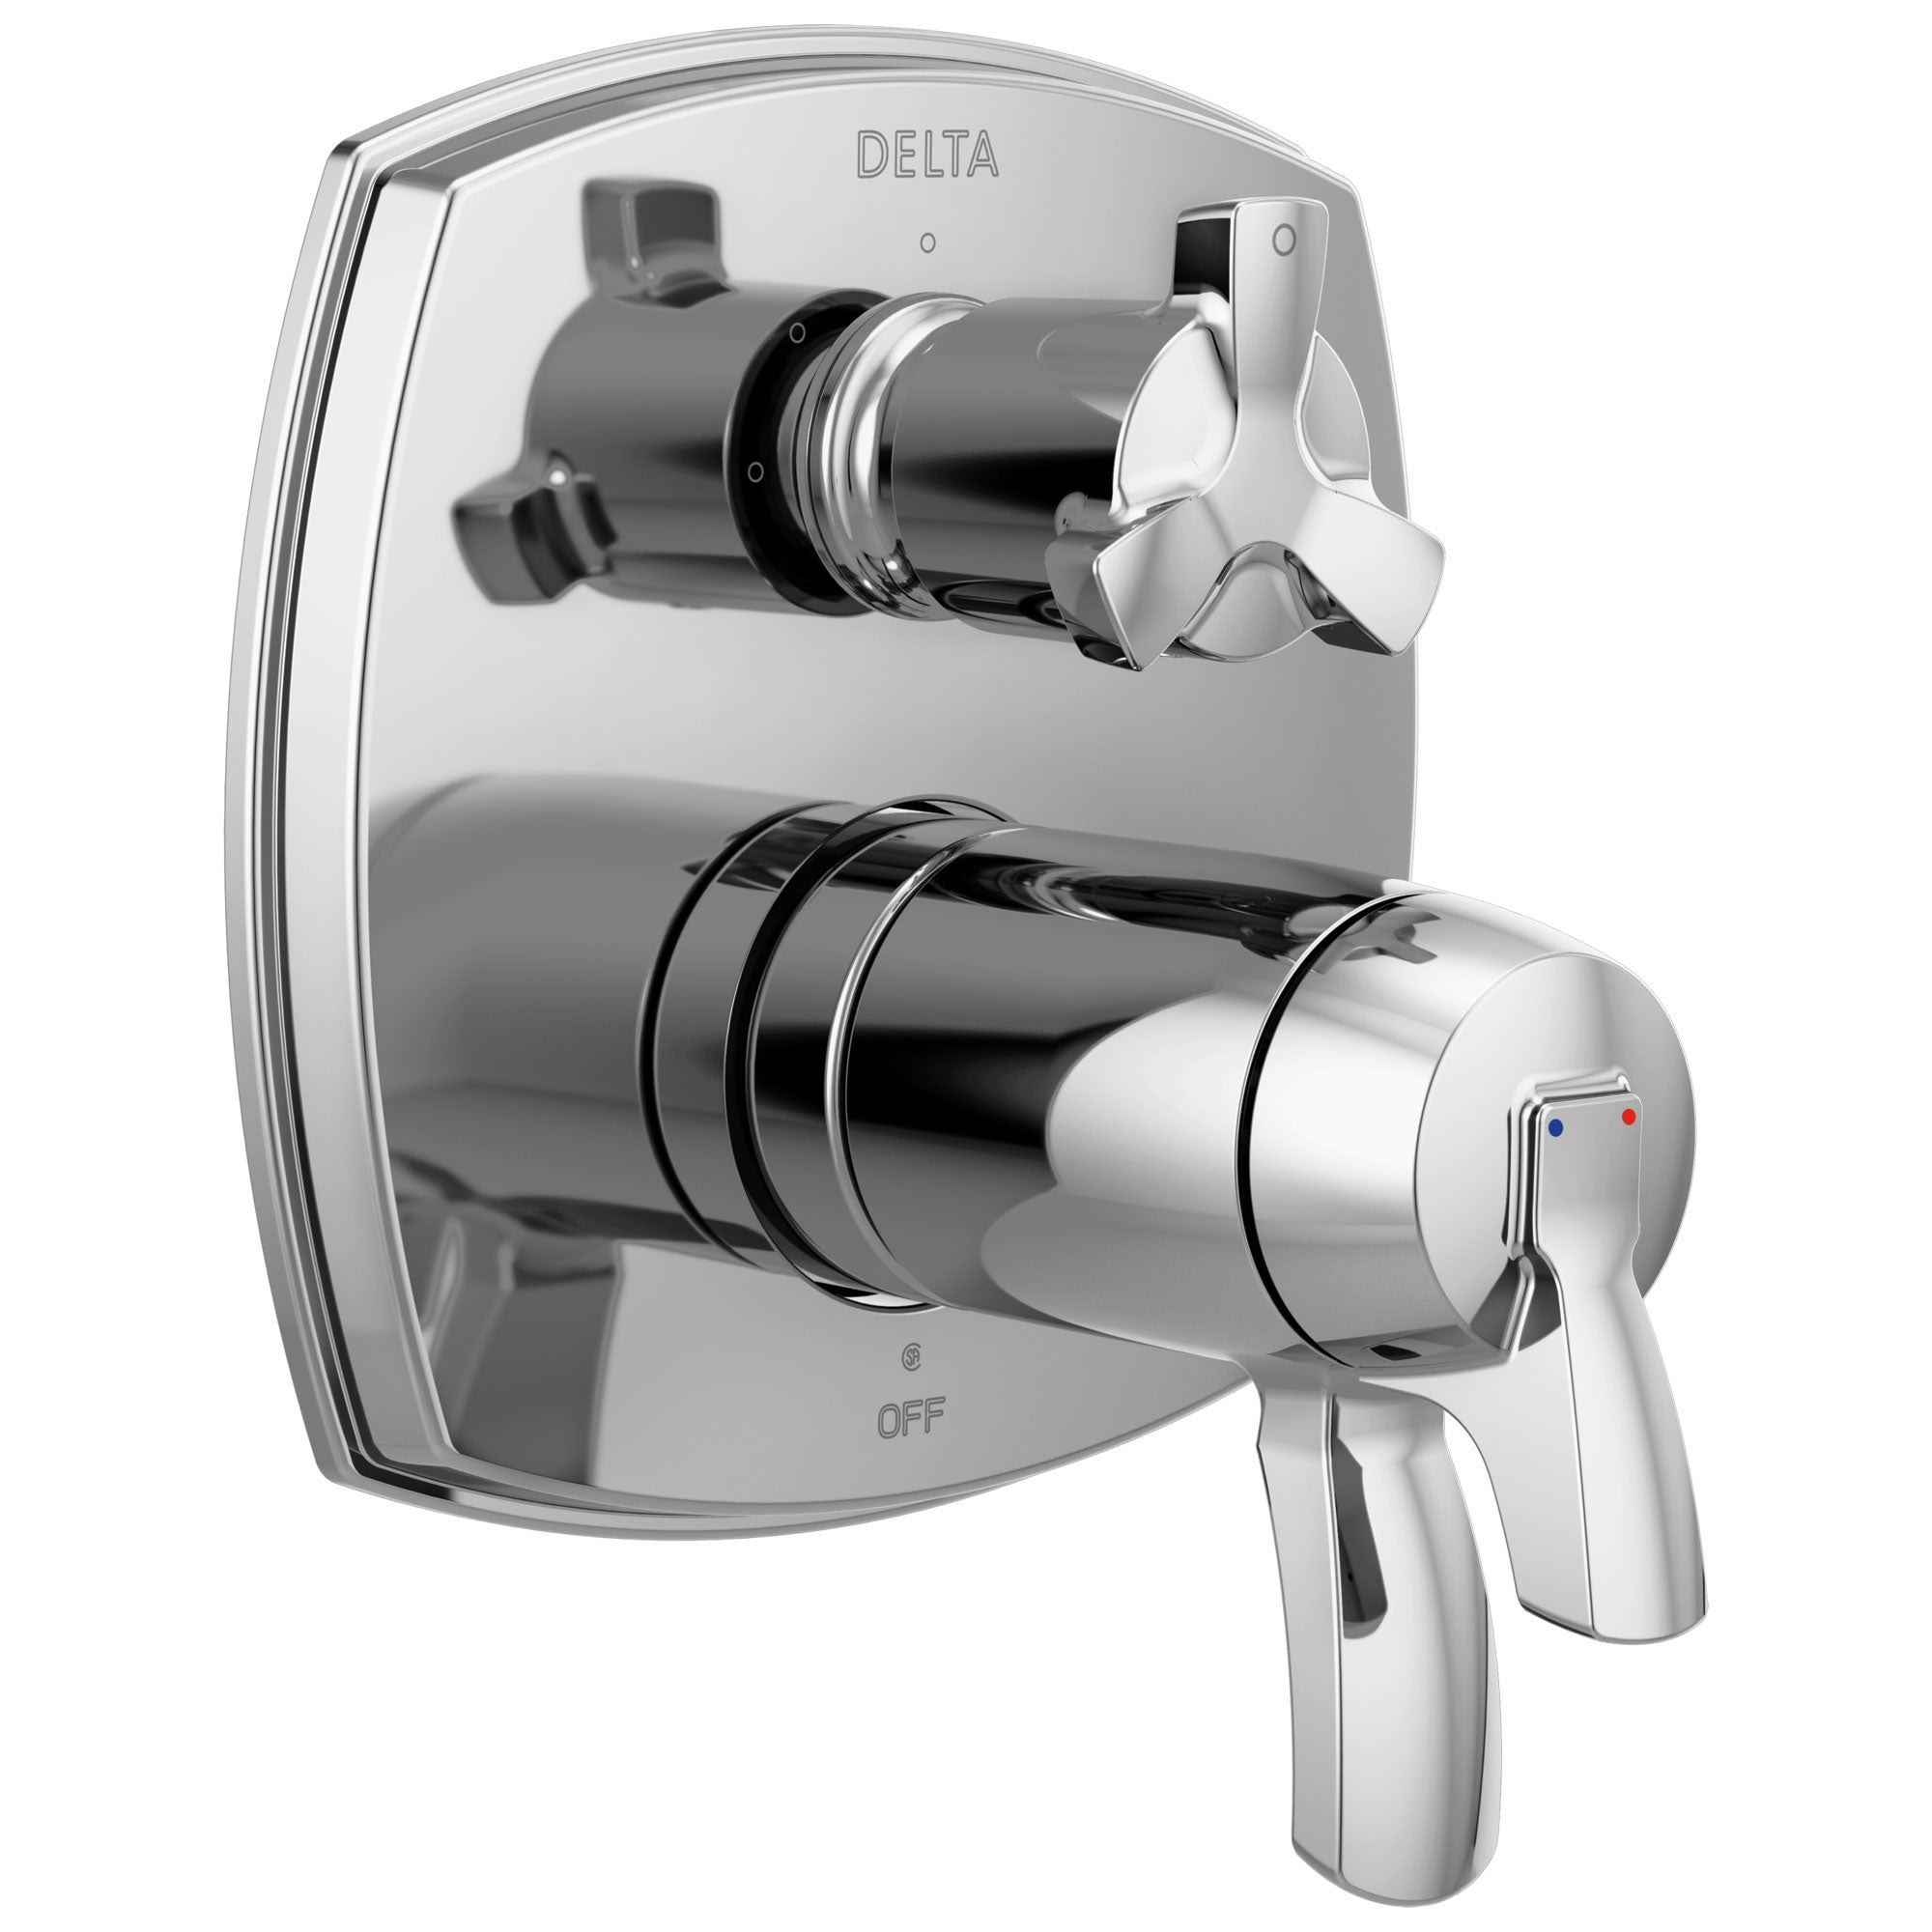 Delta Stryke Chrome Finish 3-setting Integrated Cross Handle Diverter Thermostatic Shower System Control Includes Rough-in Valve and Handles D3686V